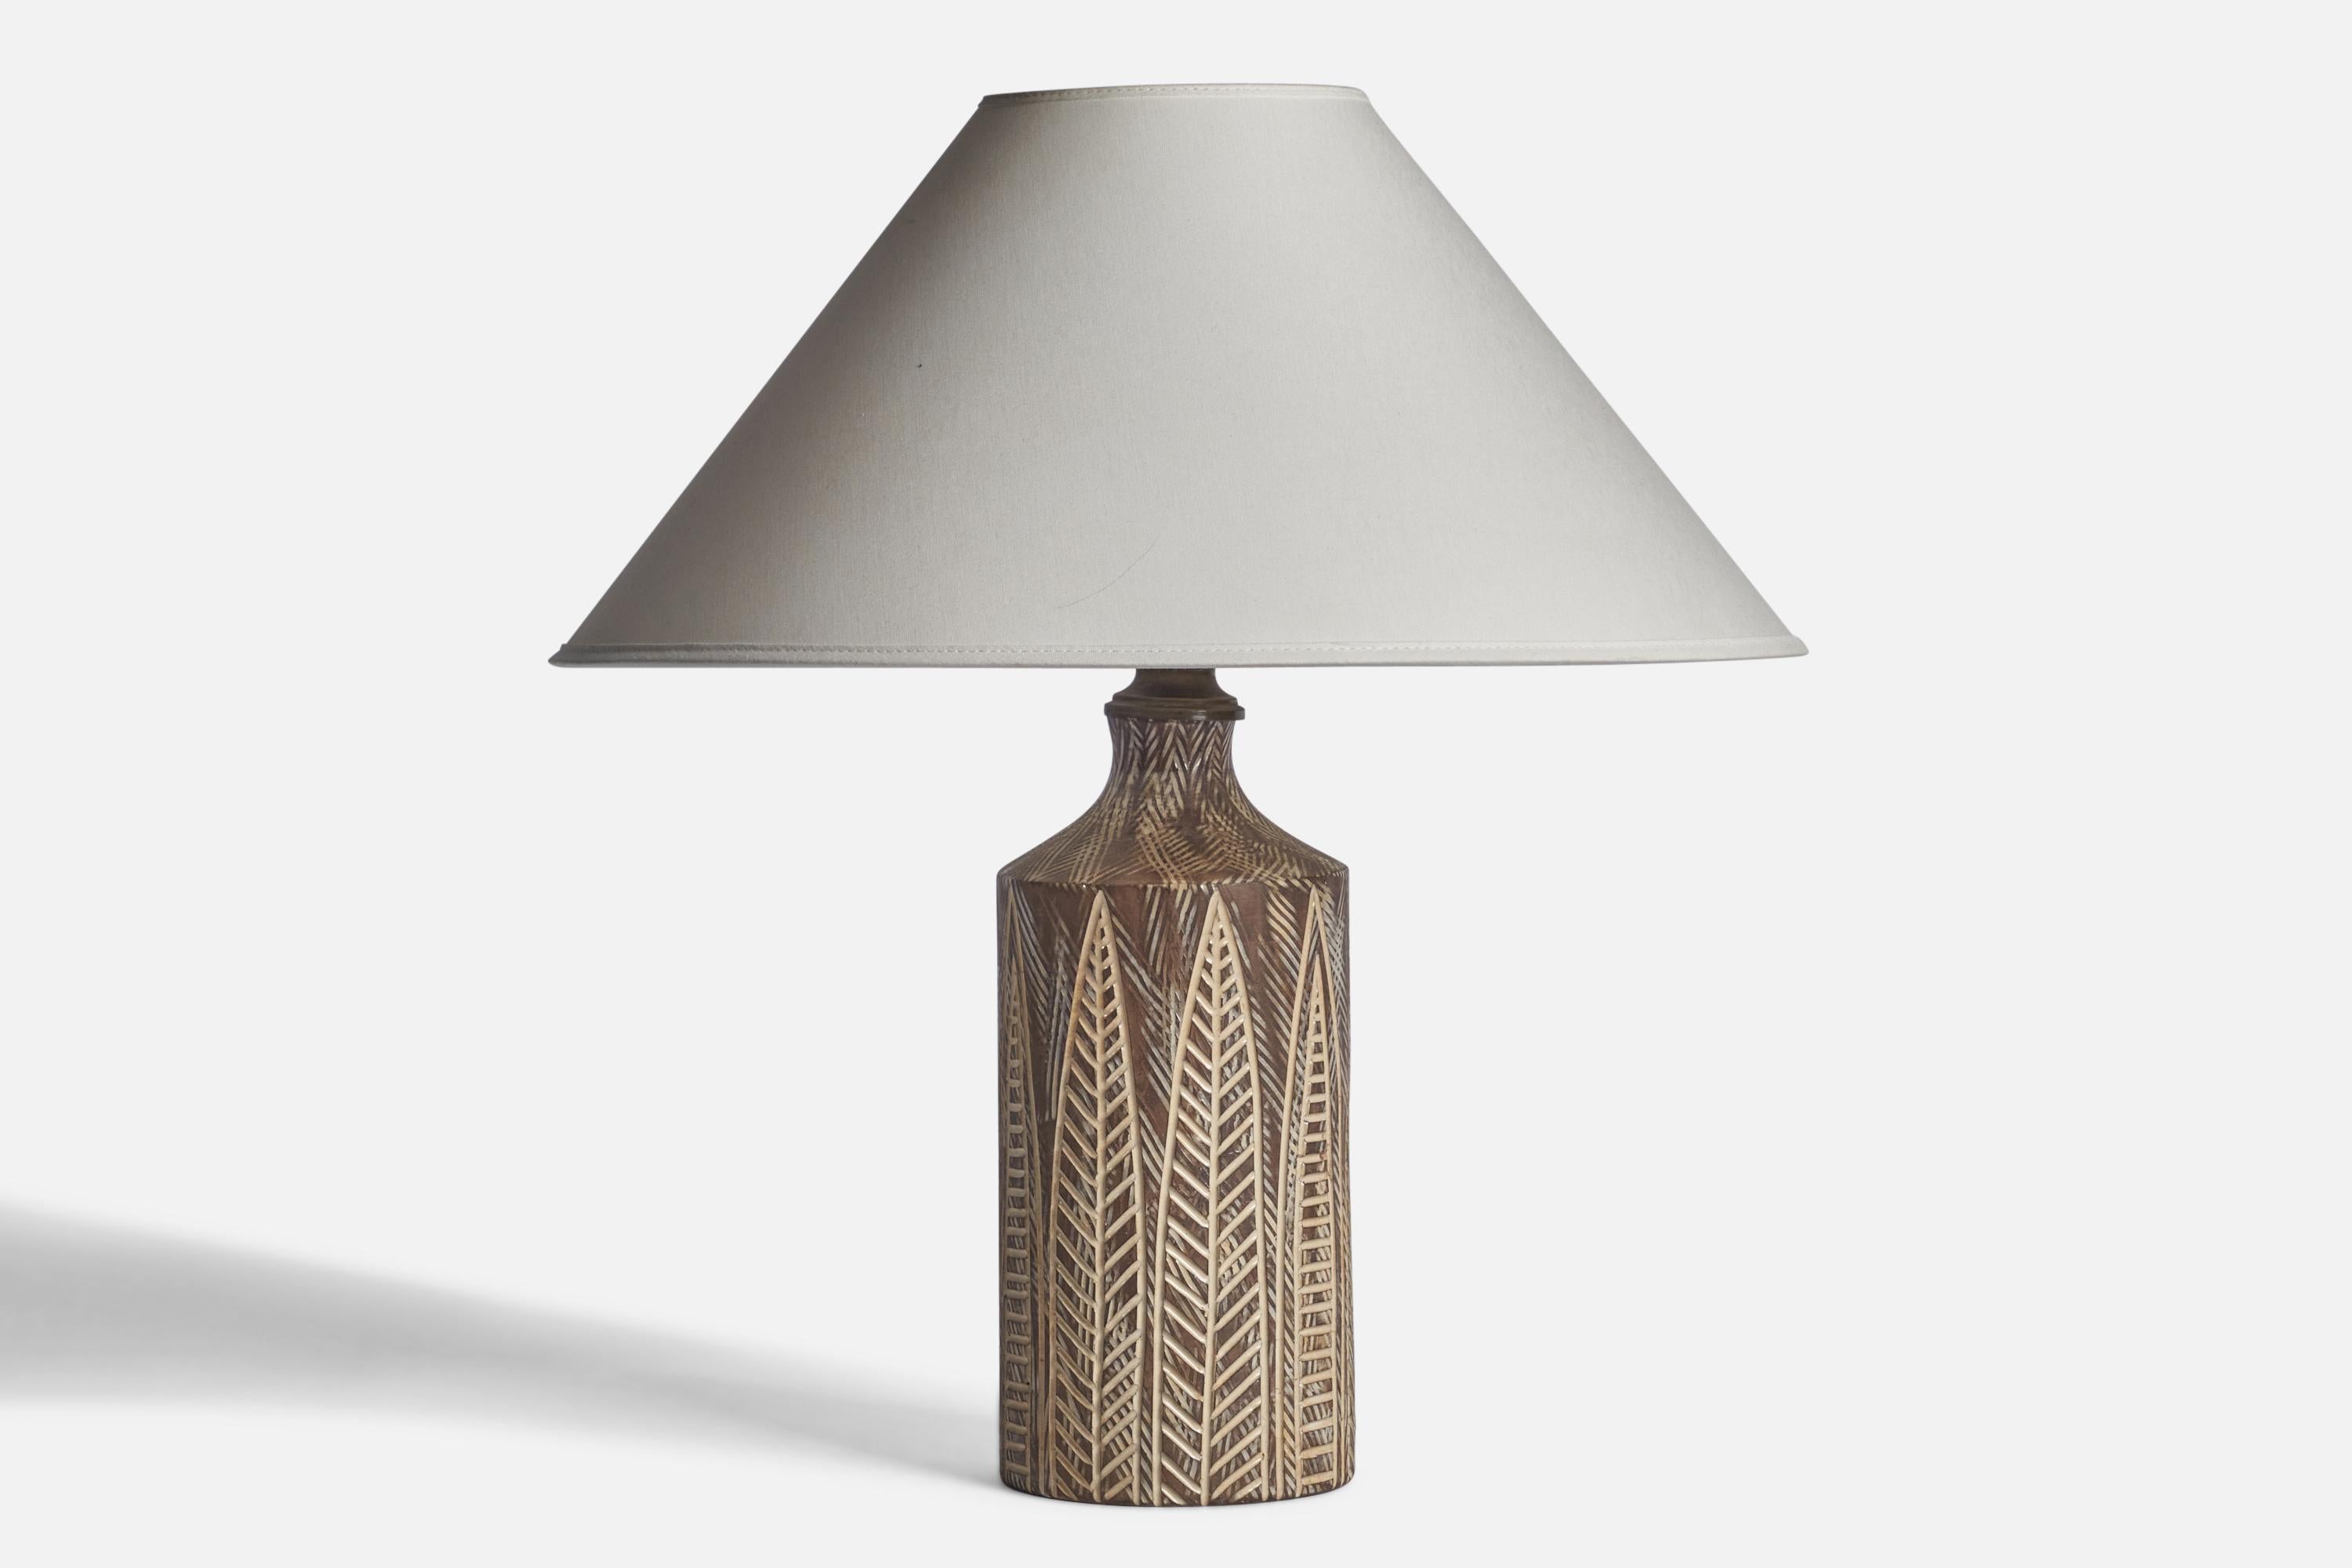 A grey-glazed incised table lamp designed by Mari Simmulson and produced by Upsala Ekeby, Sweden, 1950s.

Dimensions of Lamp (inches): 12.75” H x 4.5” Diameter
Dimensions of Shade (inches): 4.5” Top Diameter x 16” Bottom Diameter x 7.25”